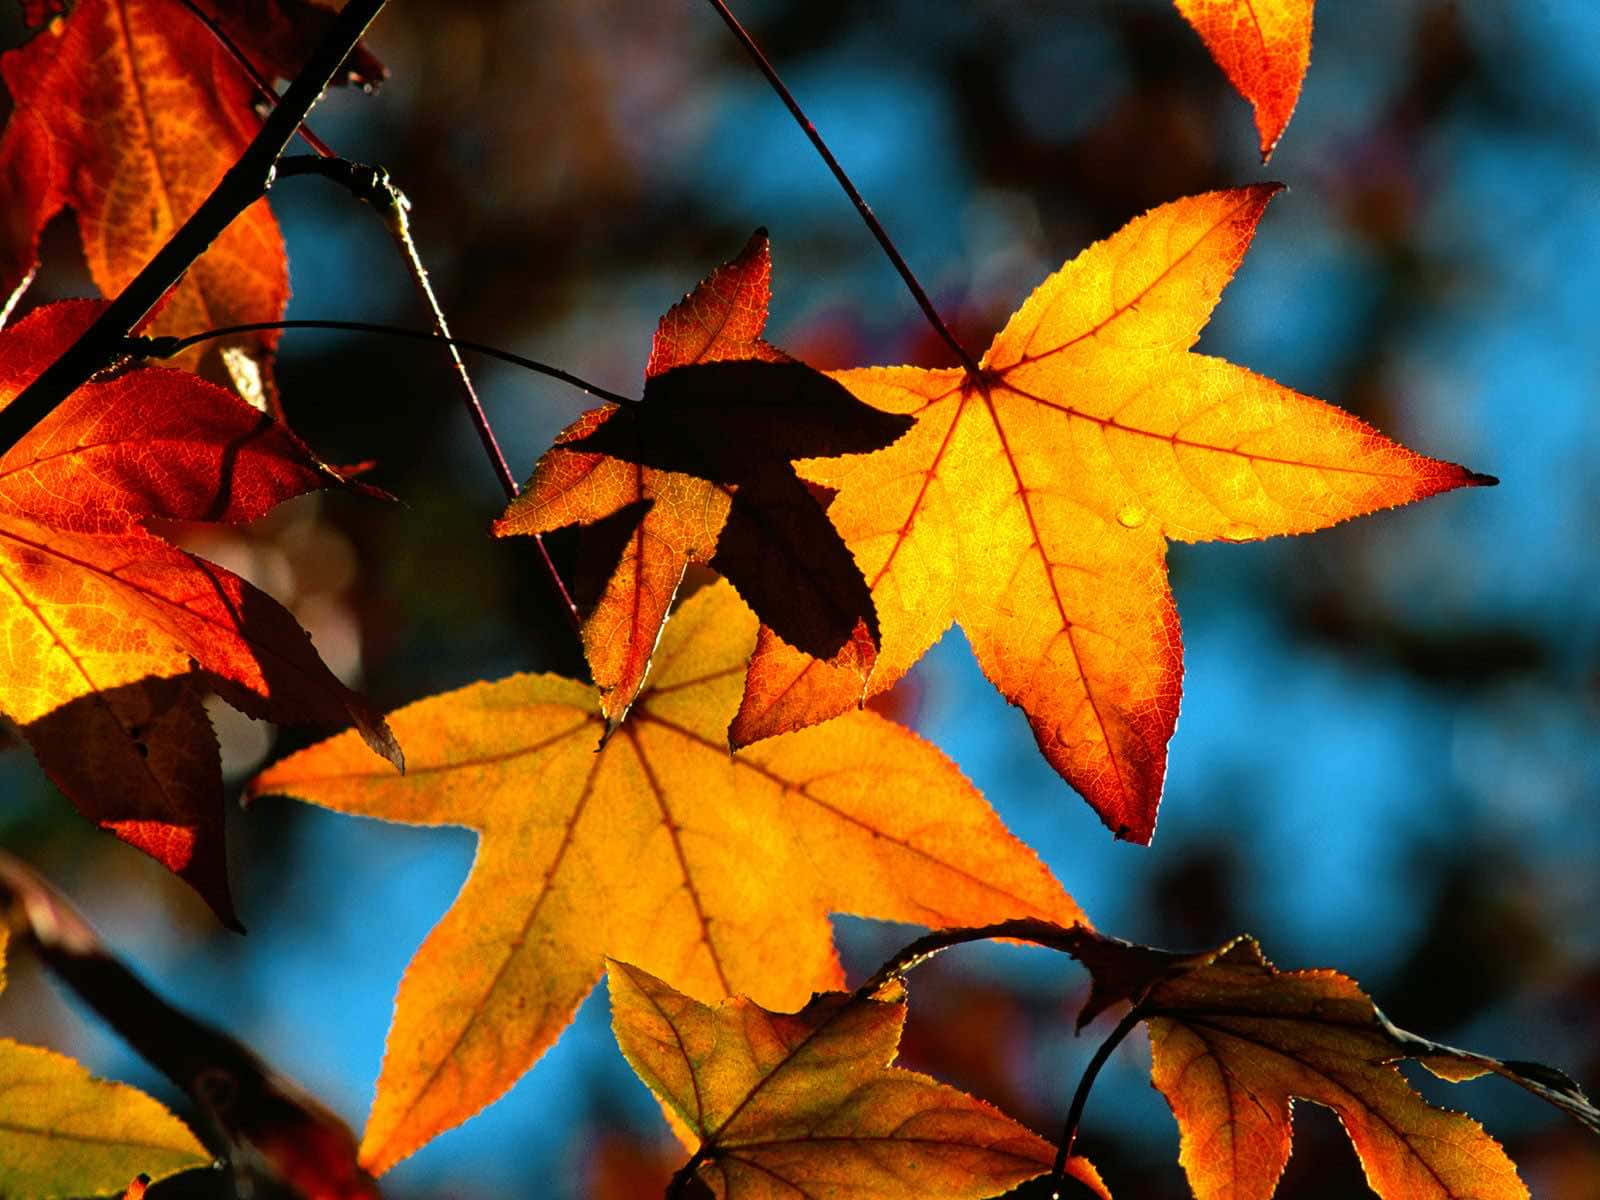 Enjoy the brilliant autumn foliage with Cool Fall. Wallpaper